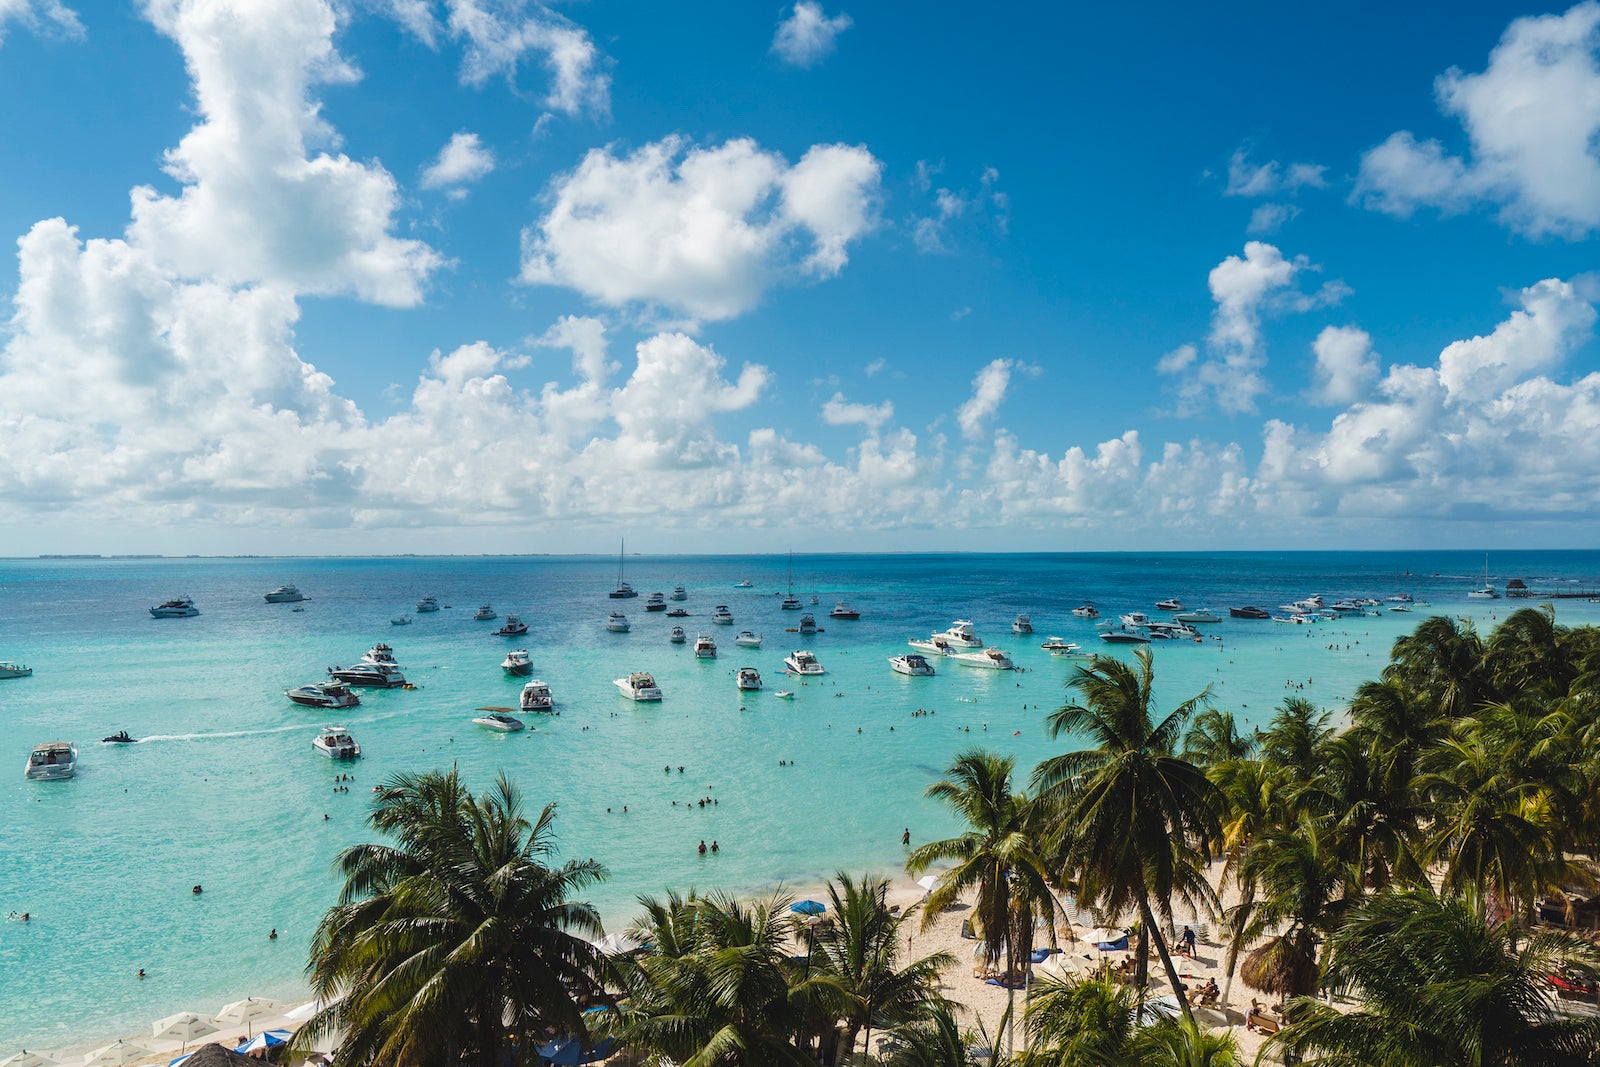 Round-trip flights to Mexico and the Caribbean starting at $267 this fall and winter